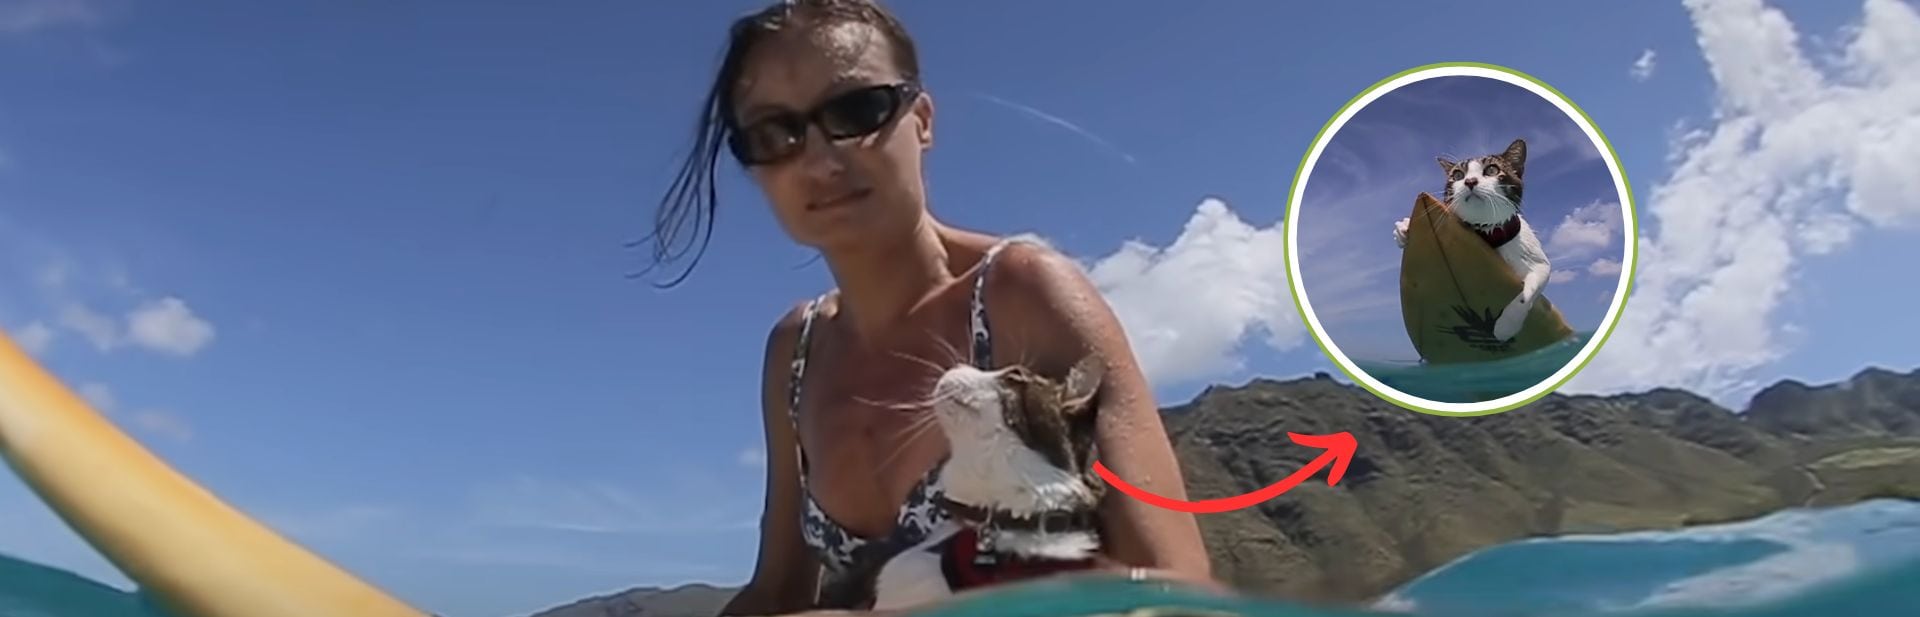 Surfing Cat Captivates the Internet with His Love for Hawaiian Waves